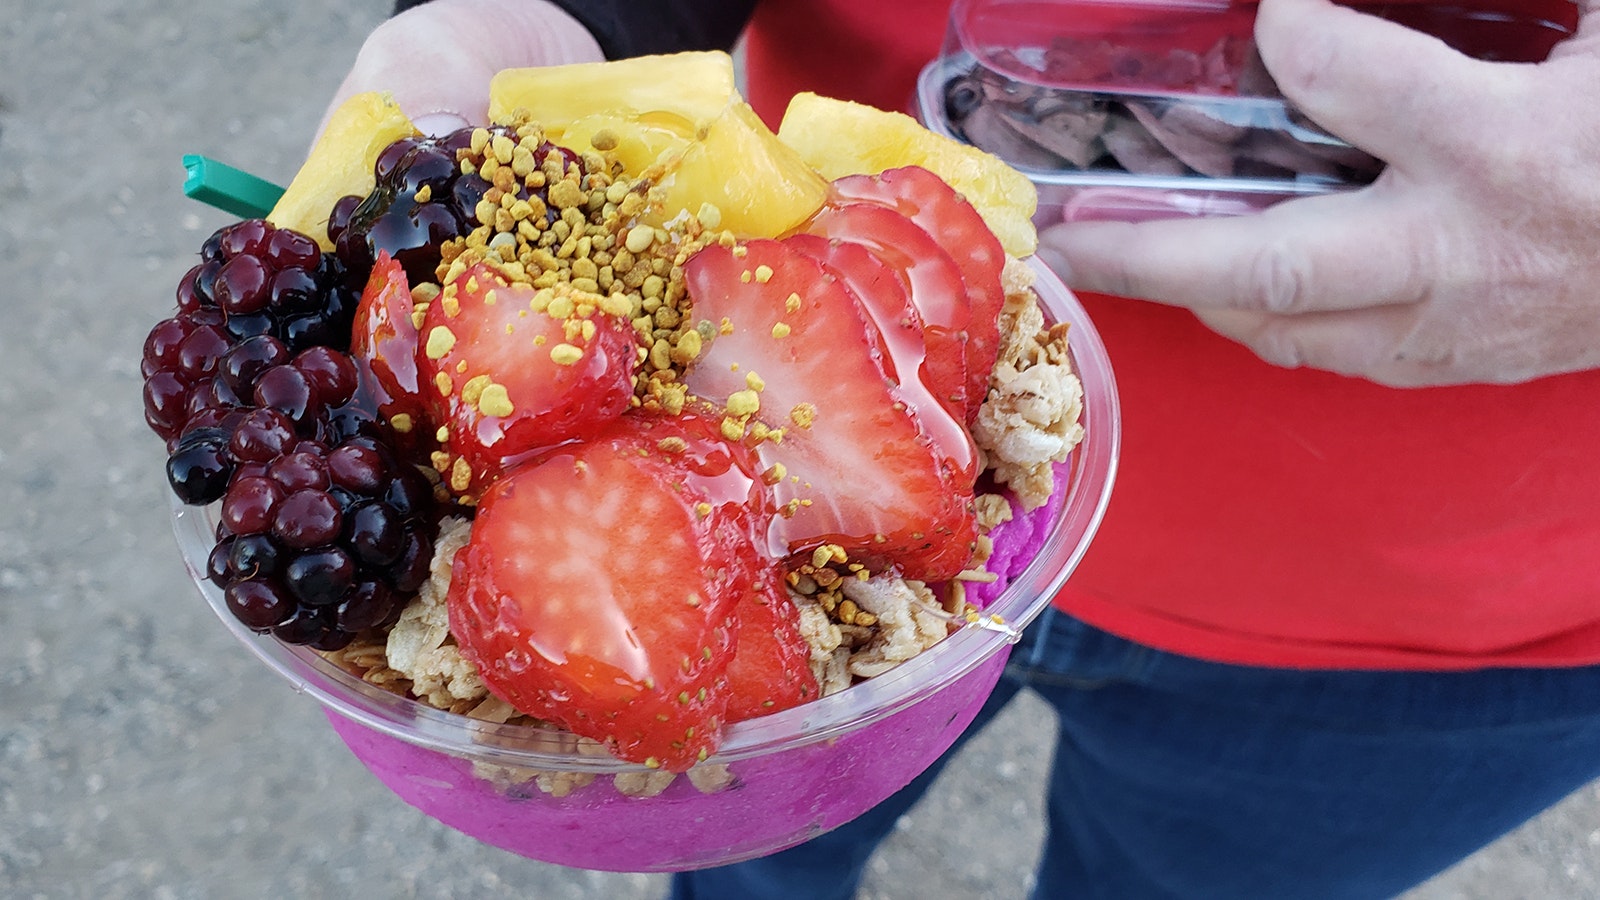 Wyo Bowls were popular at the Taste of Wyoming Food Truck Festival and Vendor Showcase.